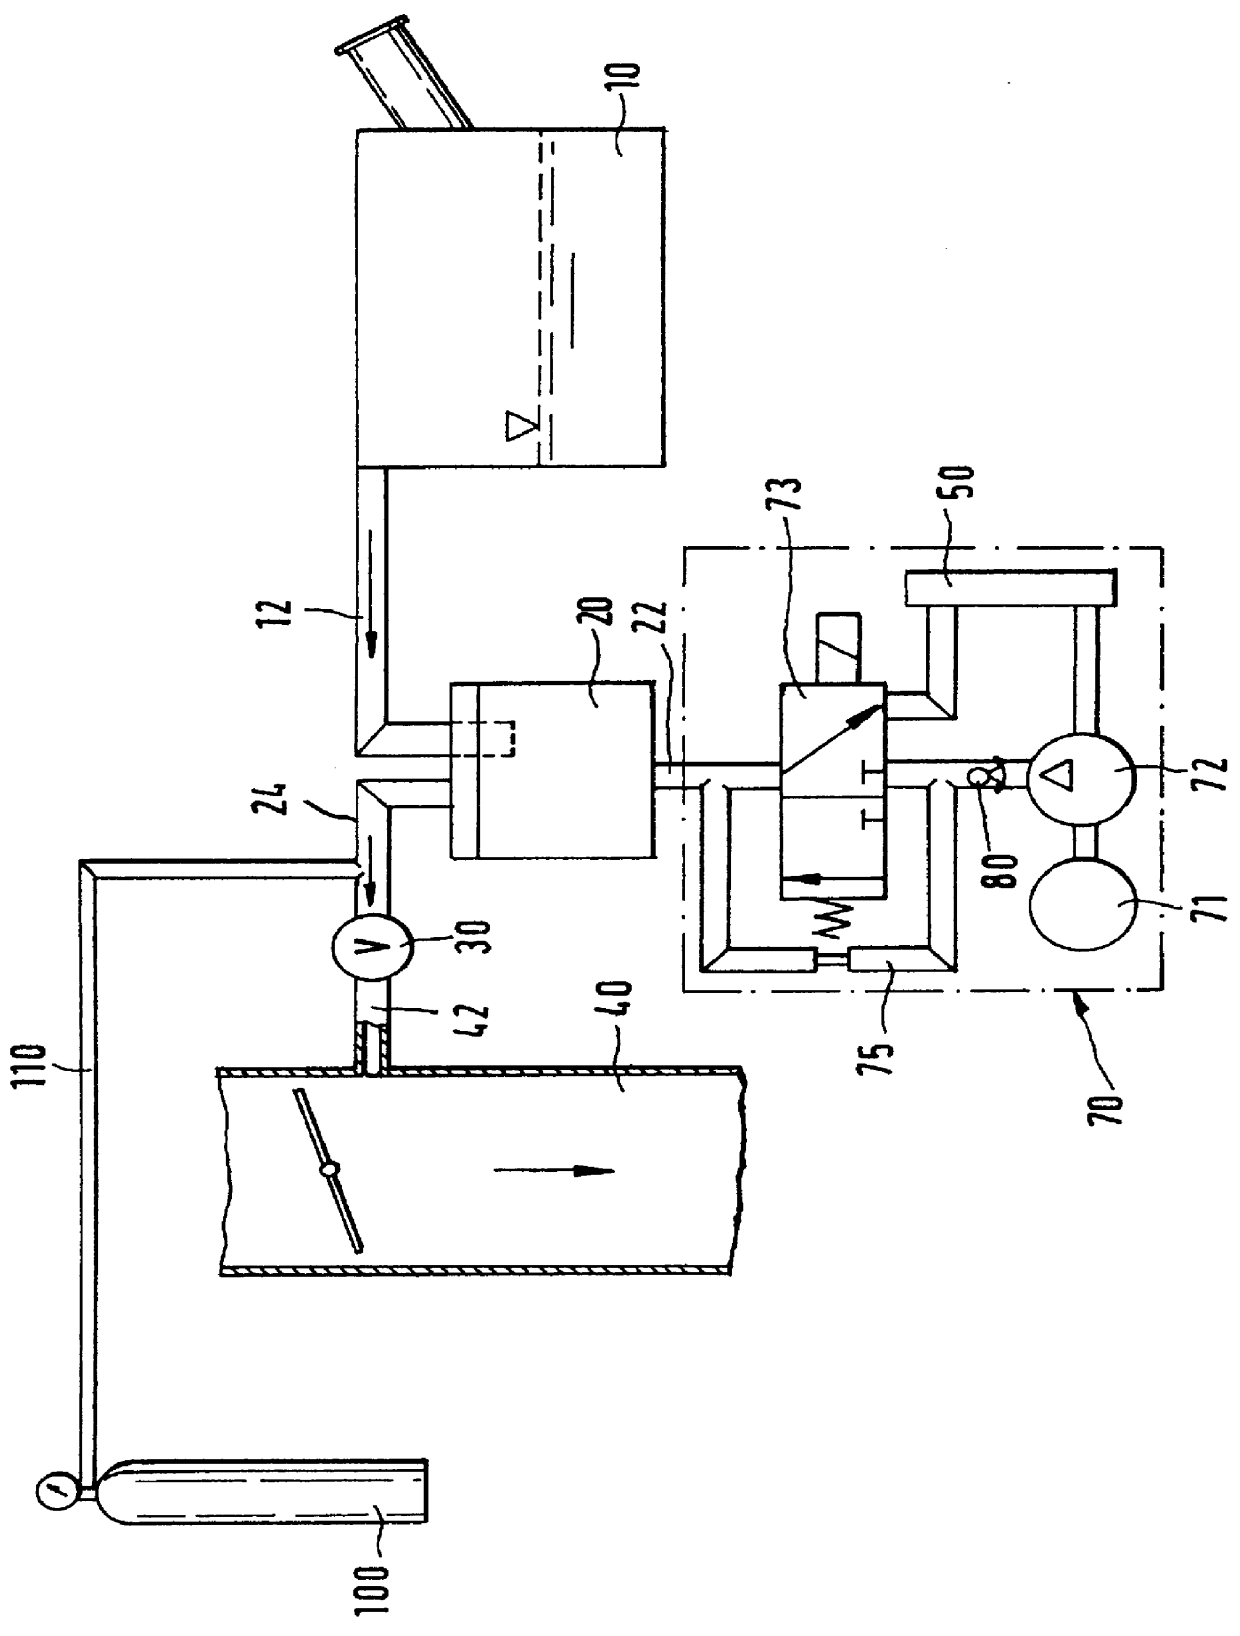 Device for diagnosis of a tank ventilation system of a vehicle